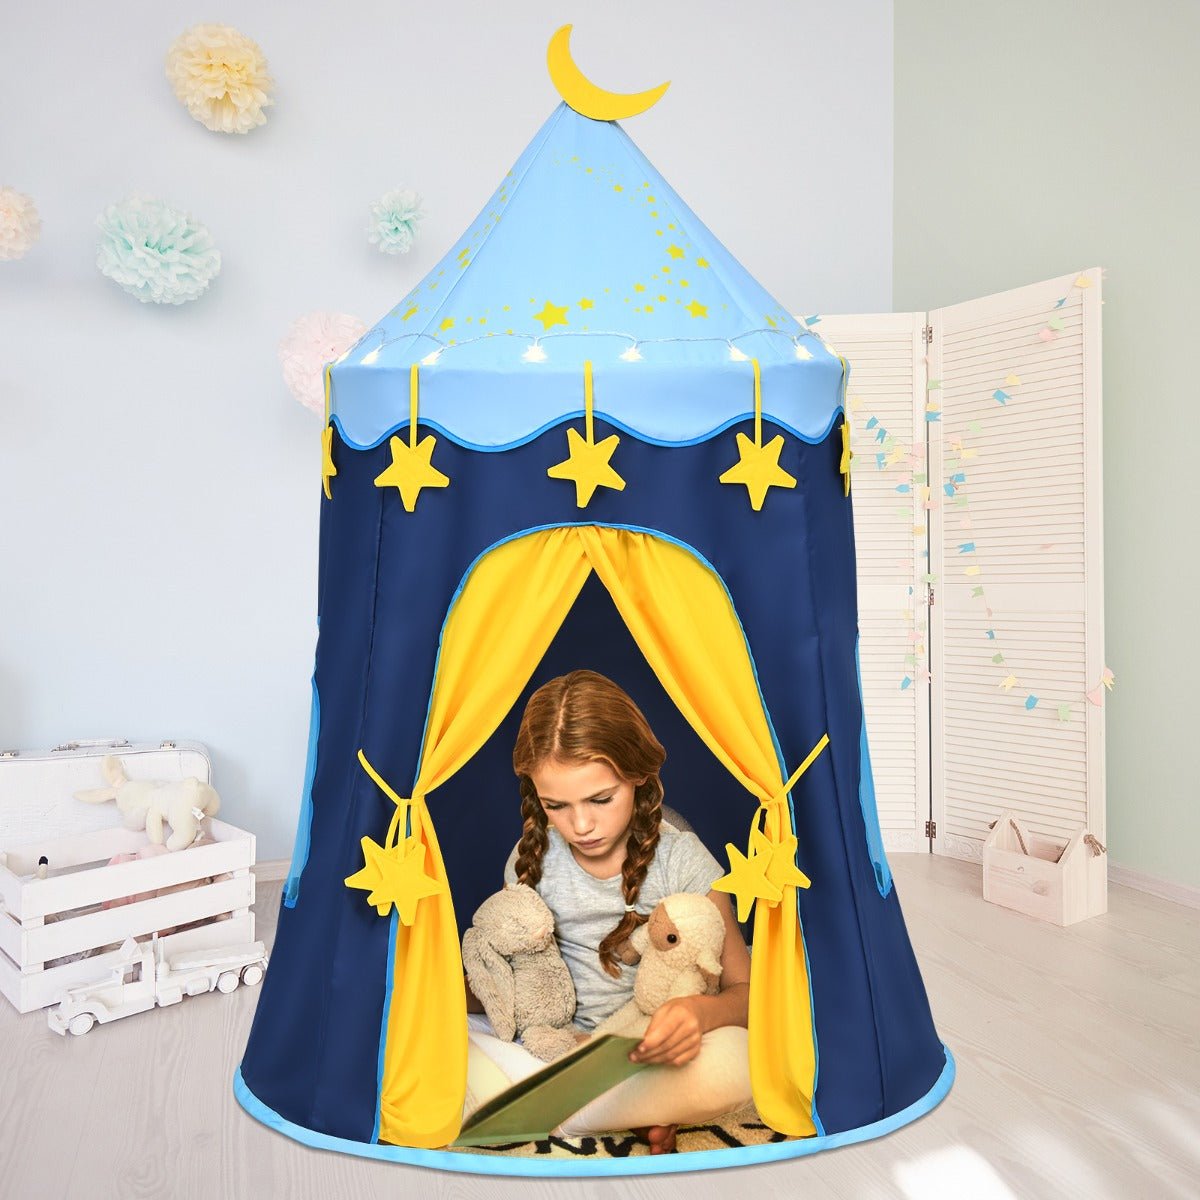 Create Memories: Kids Play Tent with Starry Lights & Carry Bag